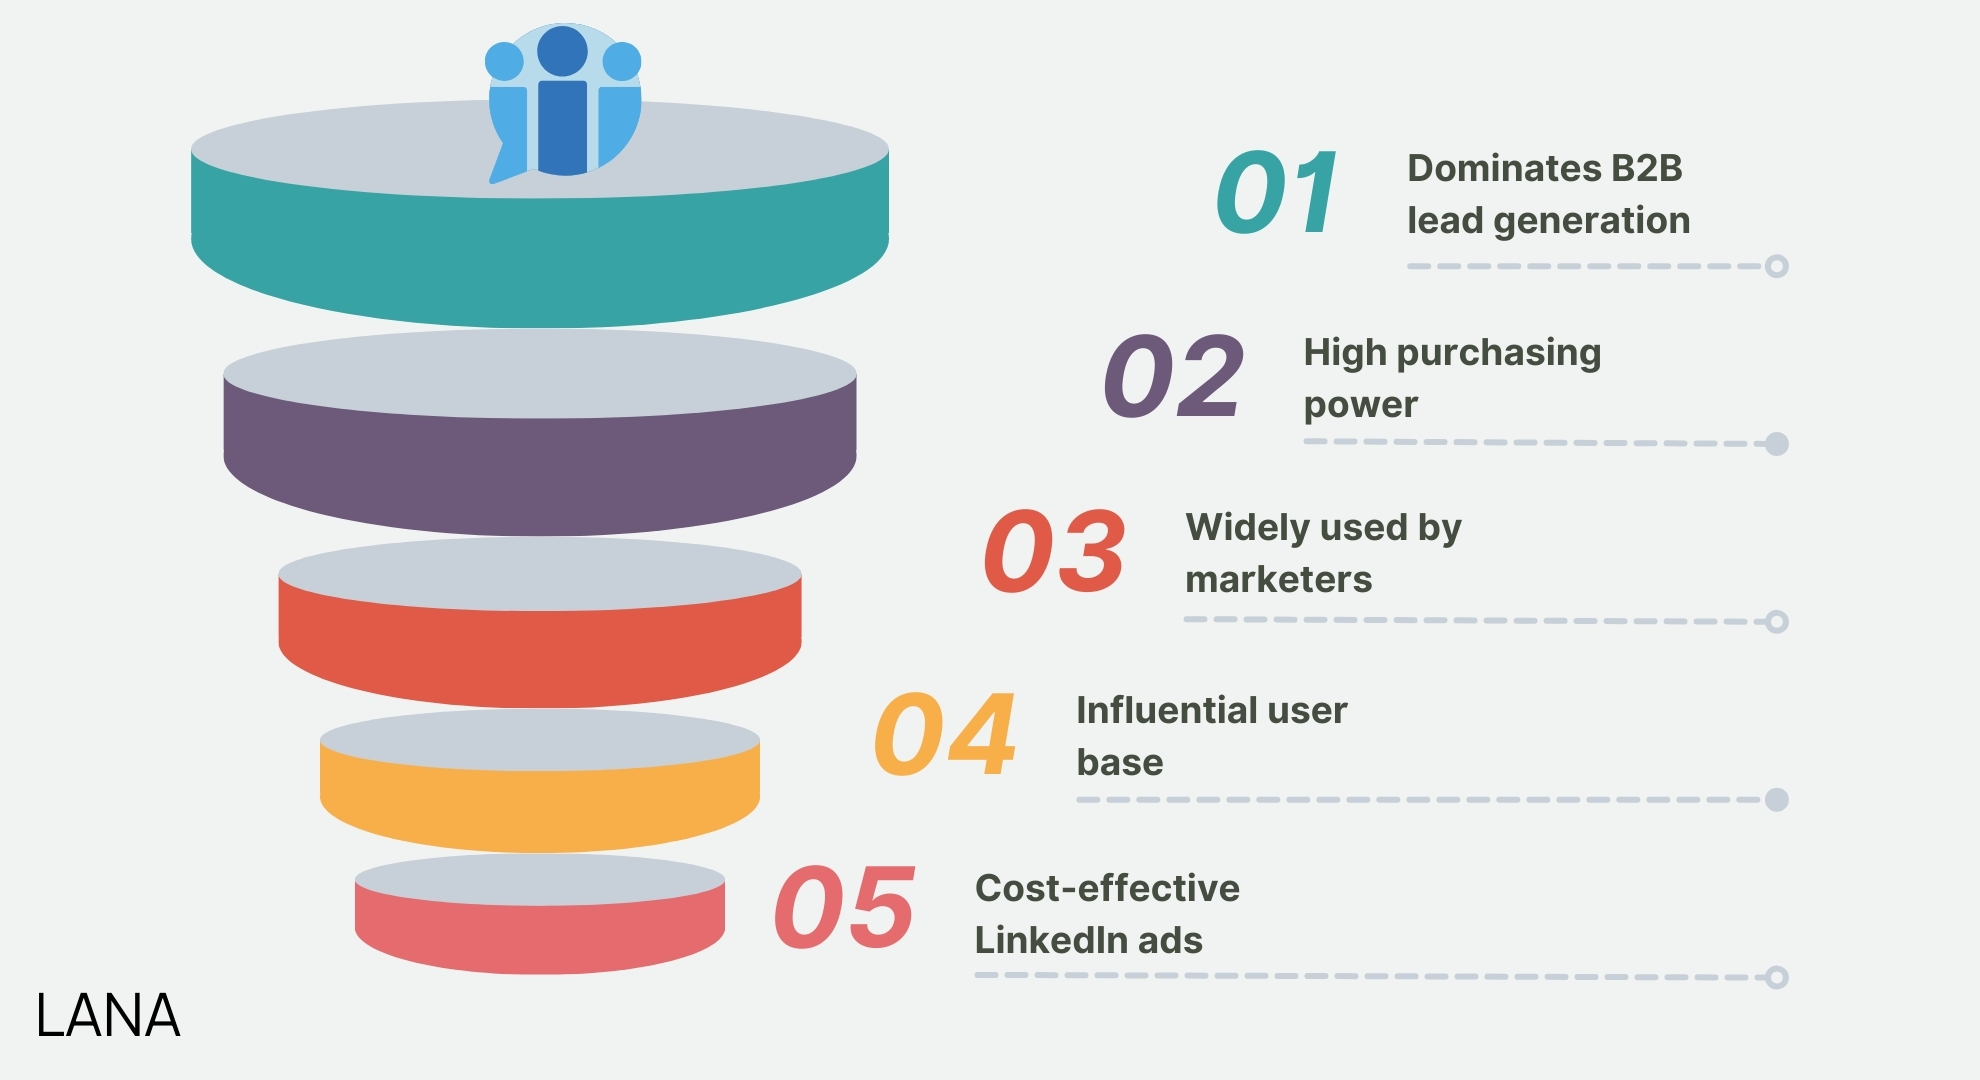 Why LinkedIn Wins for Lead Generation